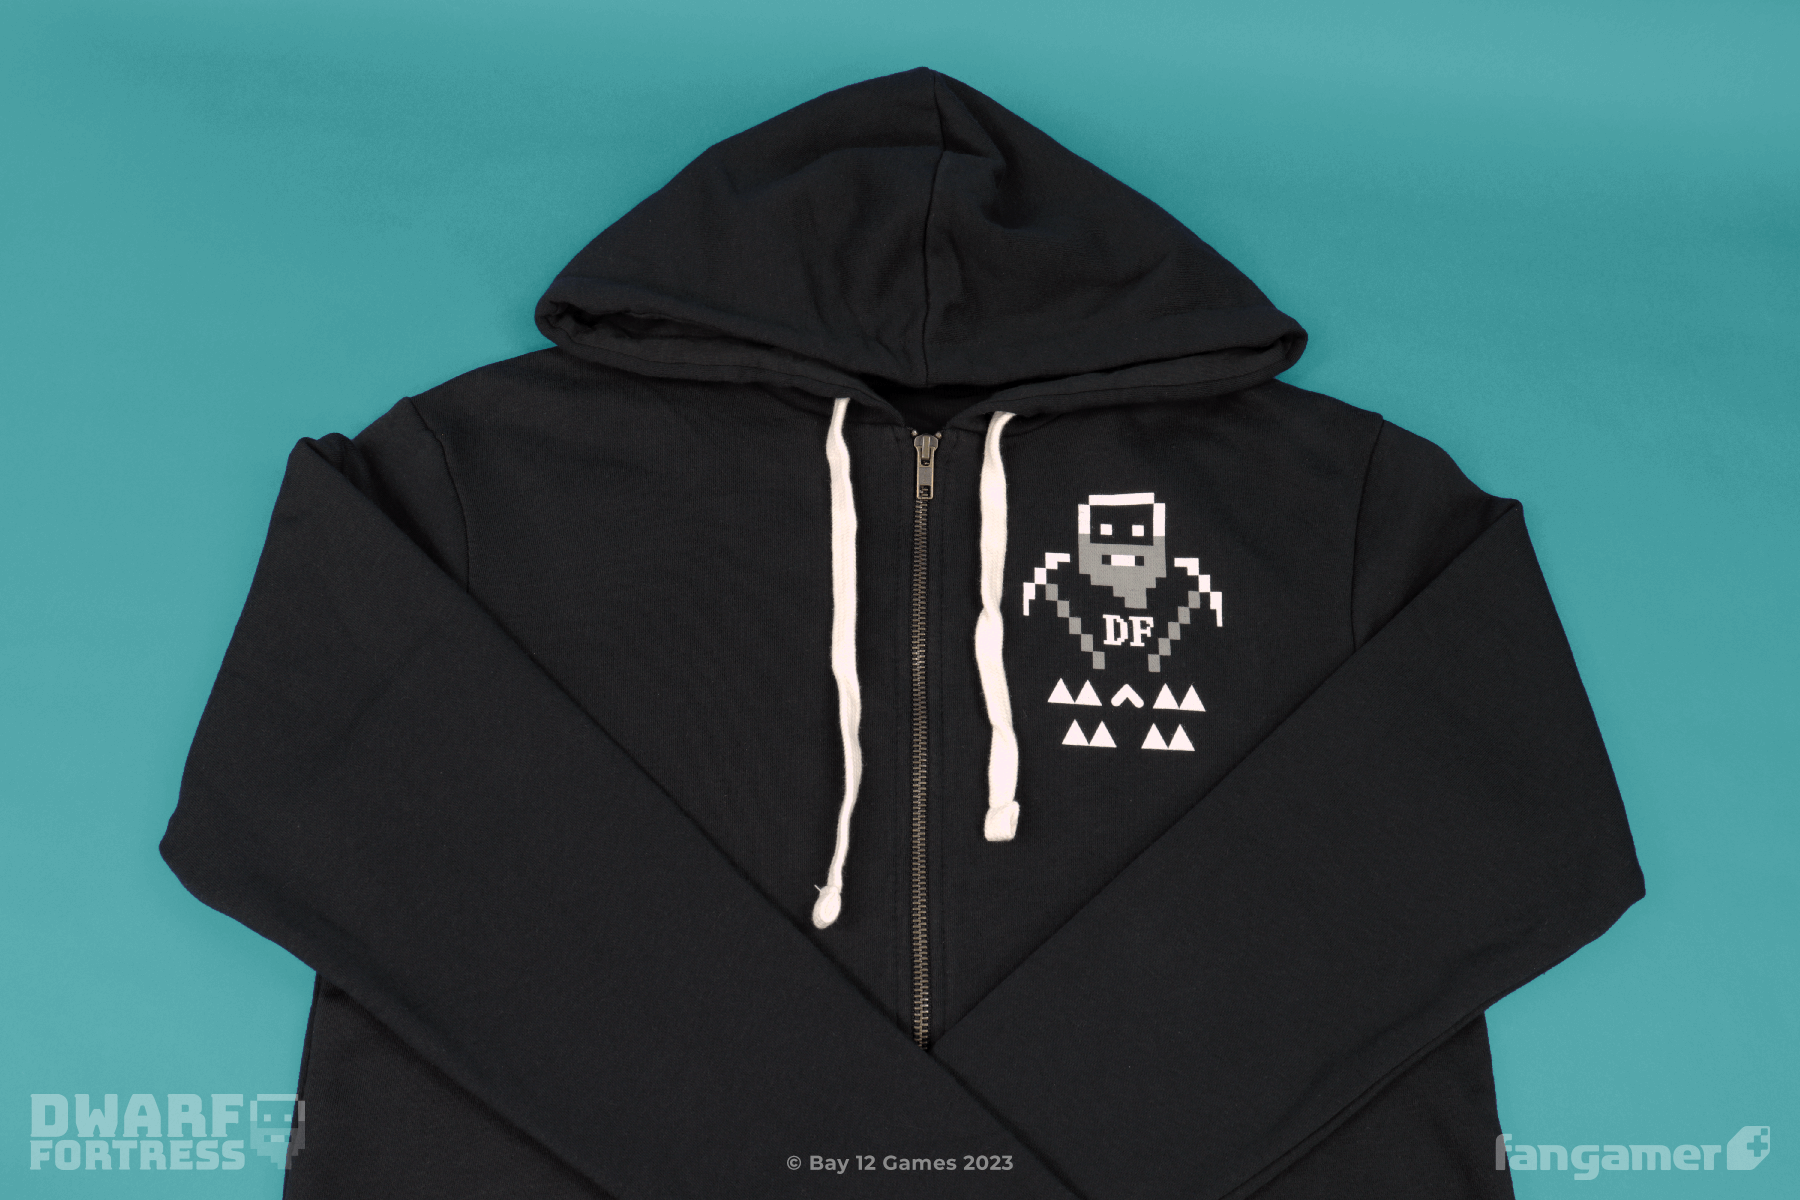 Dwarf Fortress - Menacingly Spiked Hoodie - Fangamer